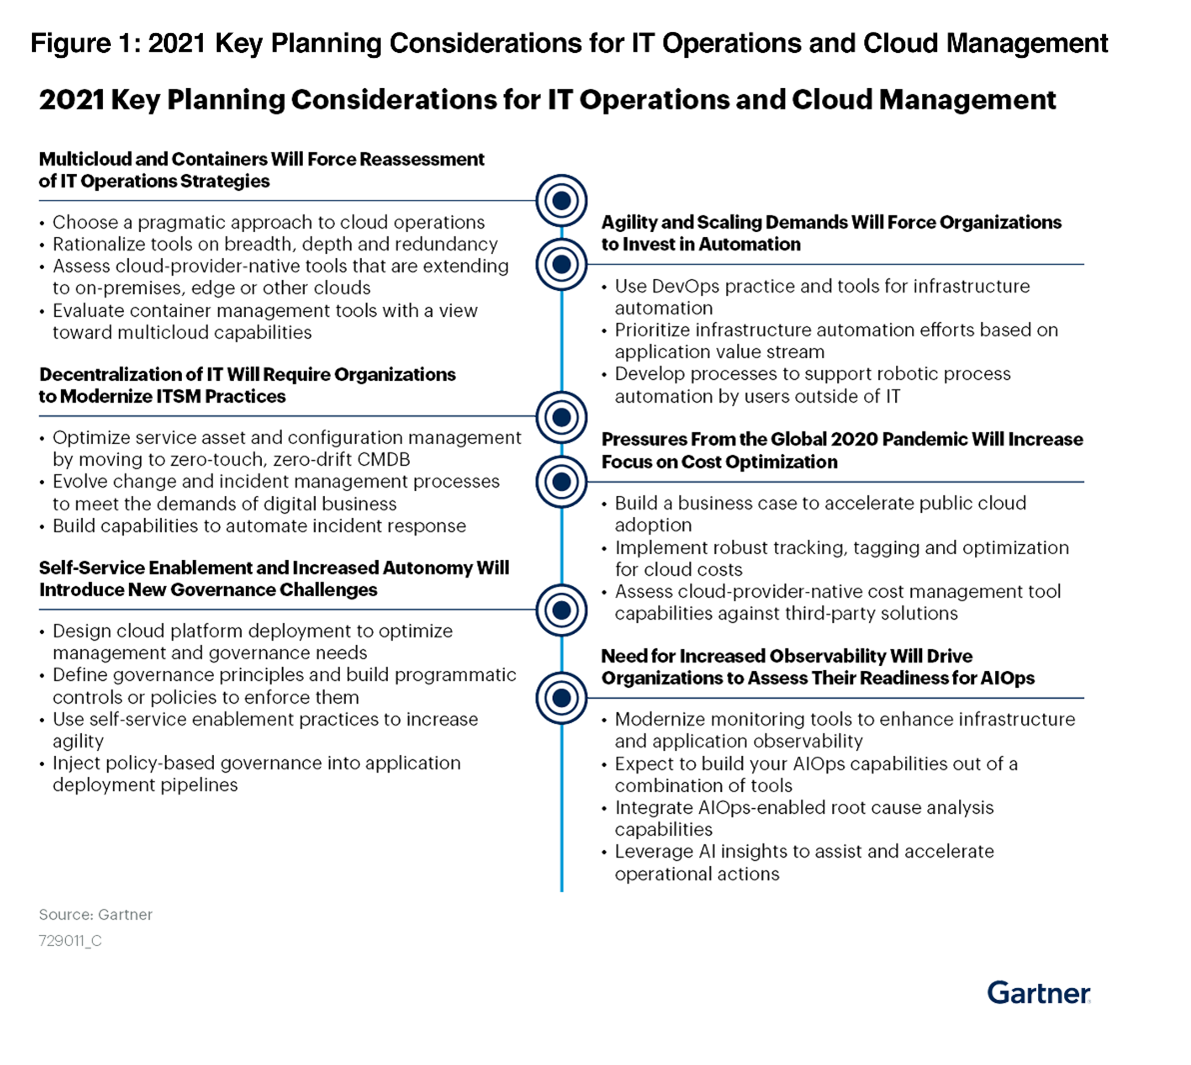 Gartner 2021 top 20 key planning considerations for IT leaders managing cloud infrastructure in their organizations.